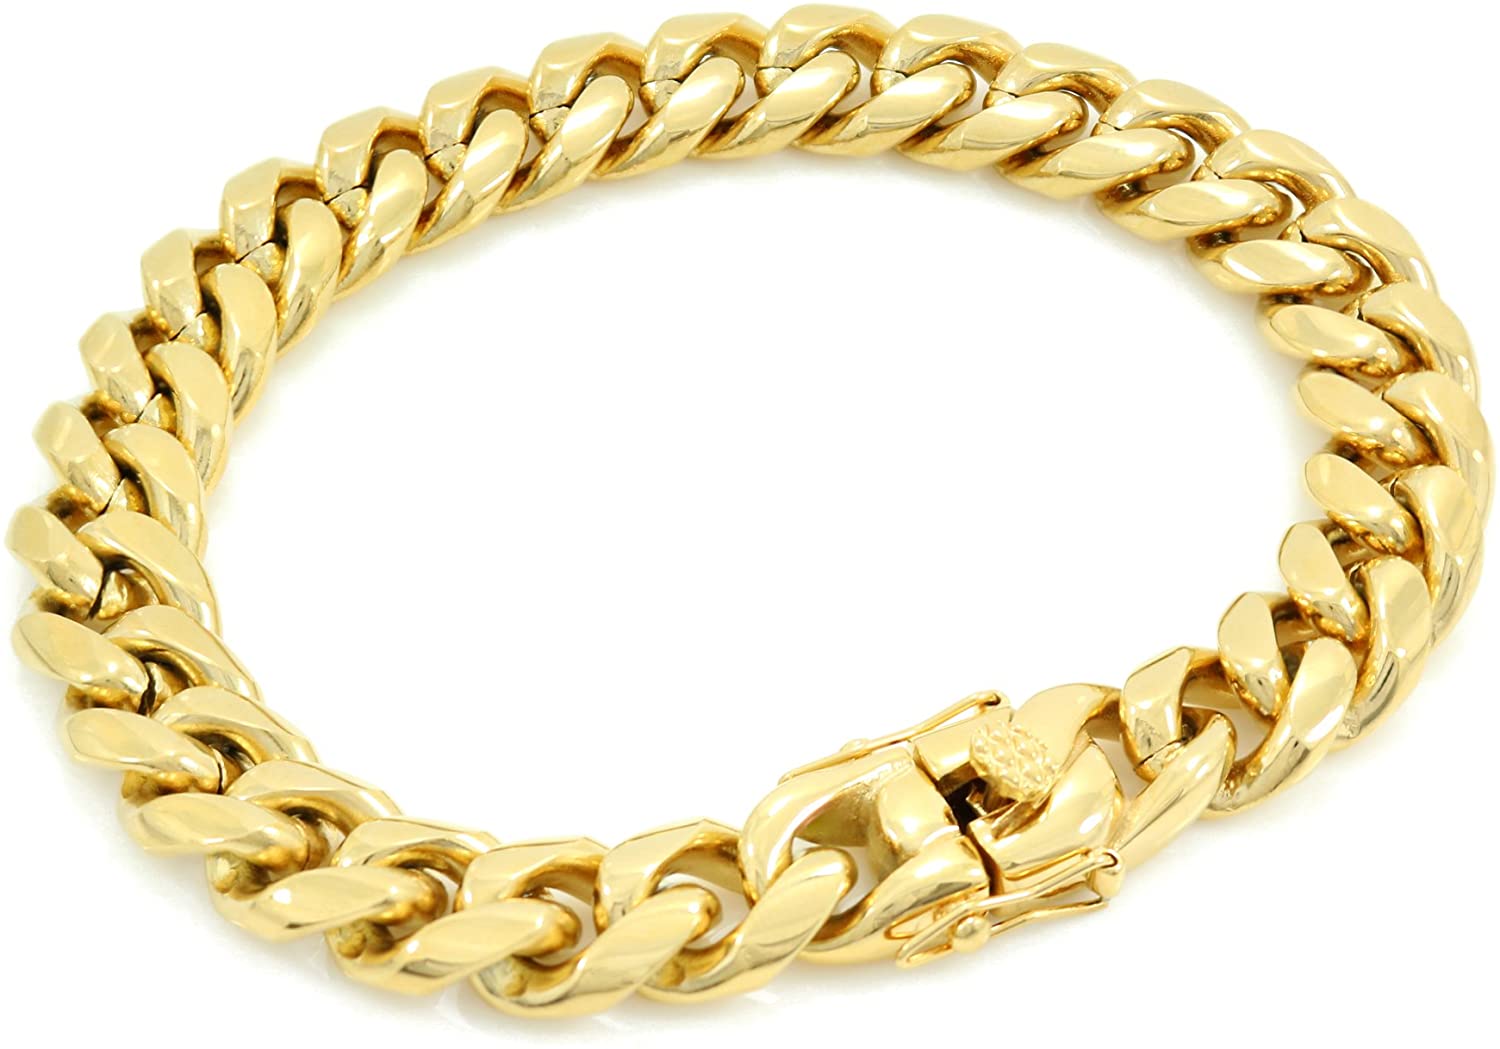 14mm Chunky Stainless Steel Cuban Link Chain Bracelet – The Steel Shop